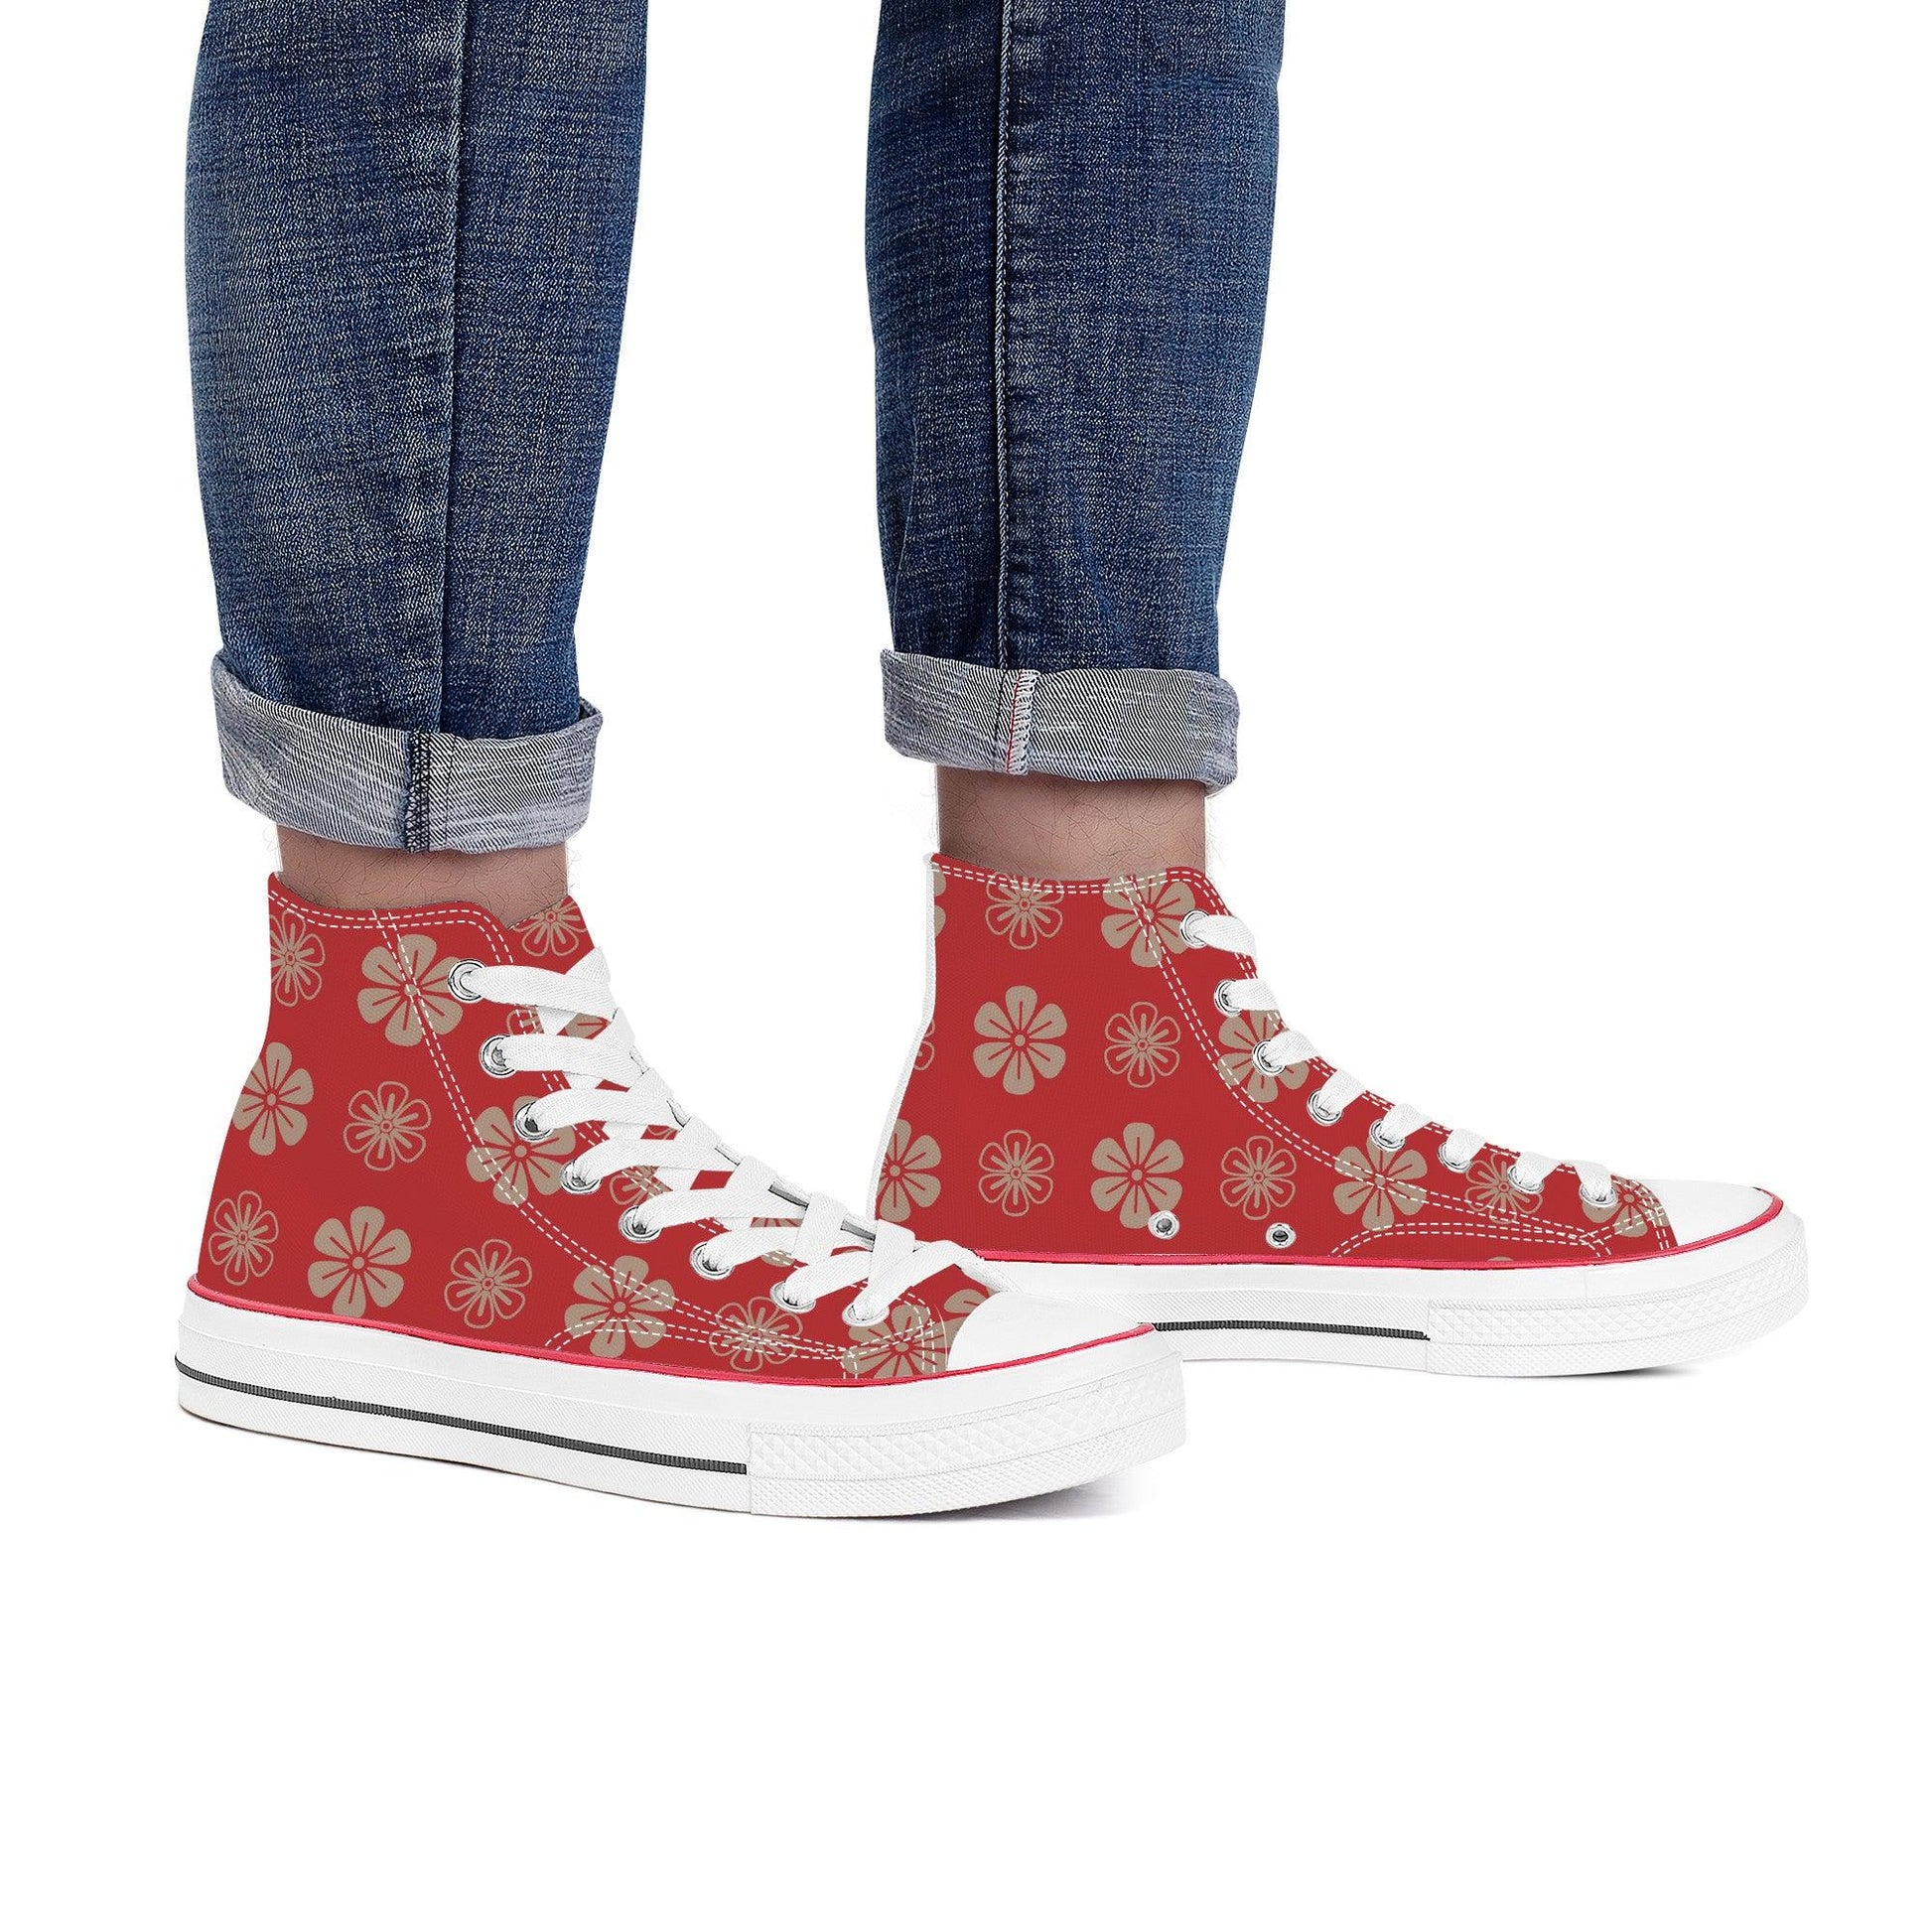 Aka 赤 - Red High Top Canvas Shoes - Kaito Japan Design 